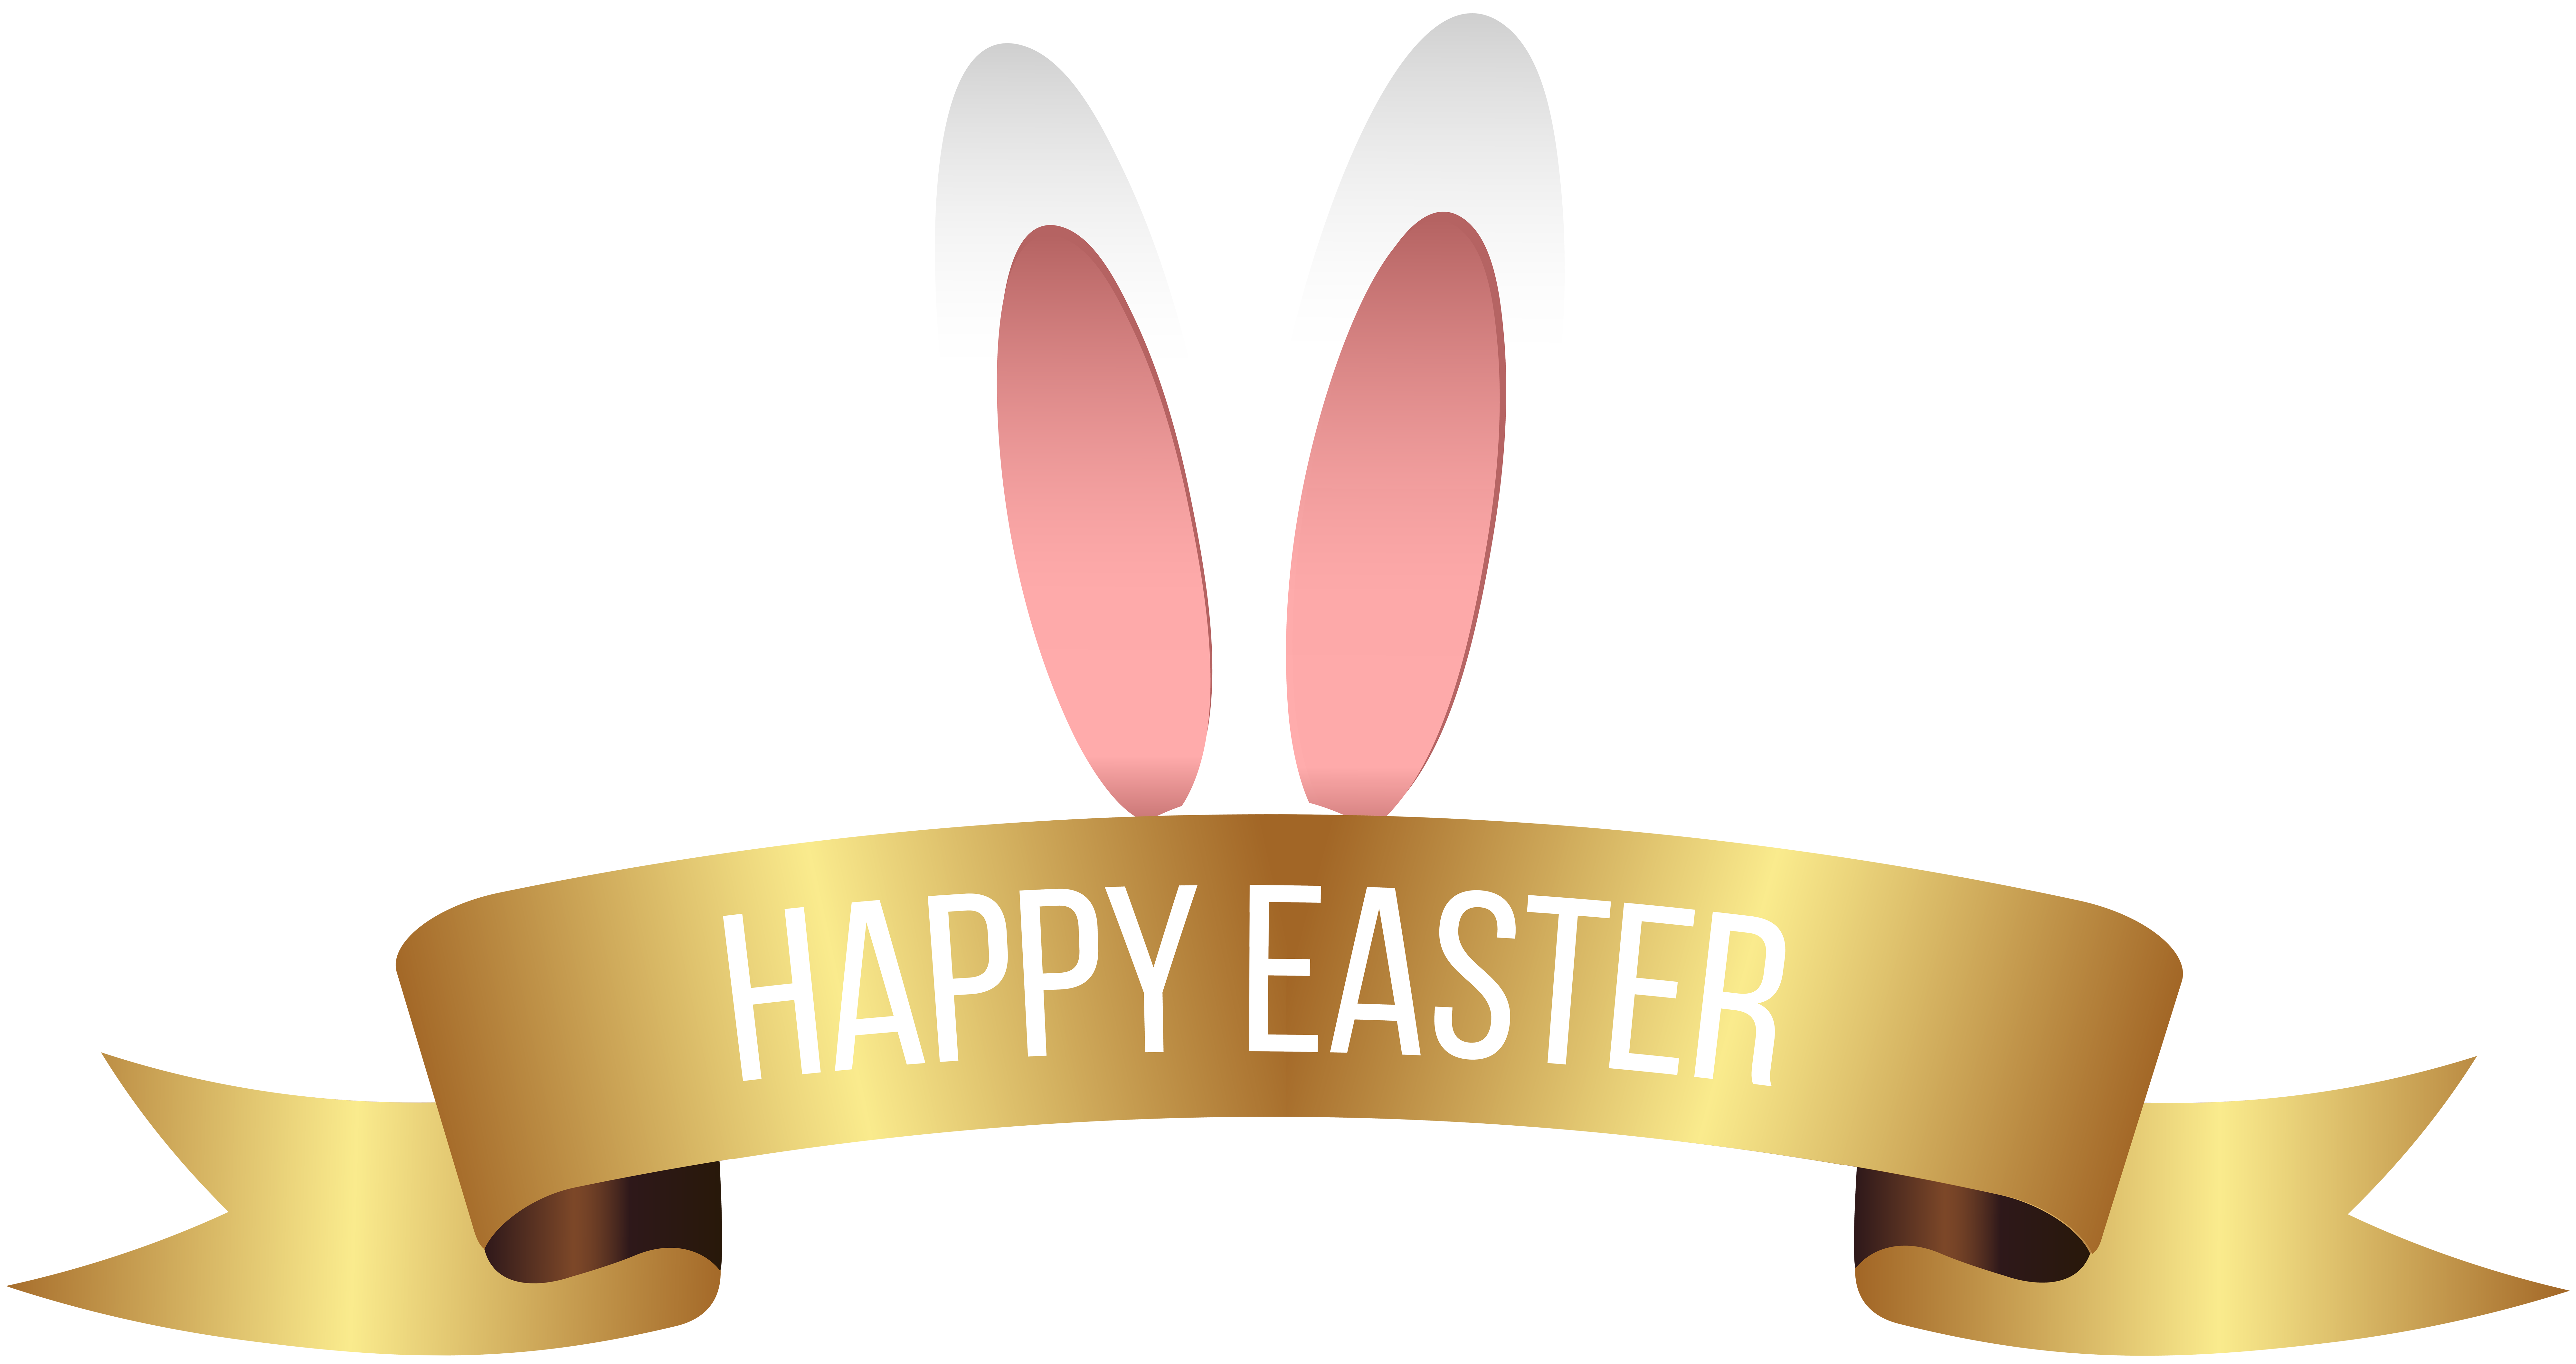 Free Easter Banner Cliparts, Download Free Easter Banner Cliparts png